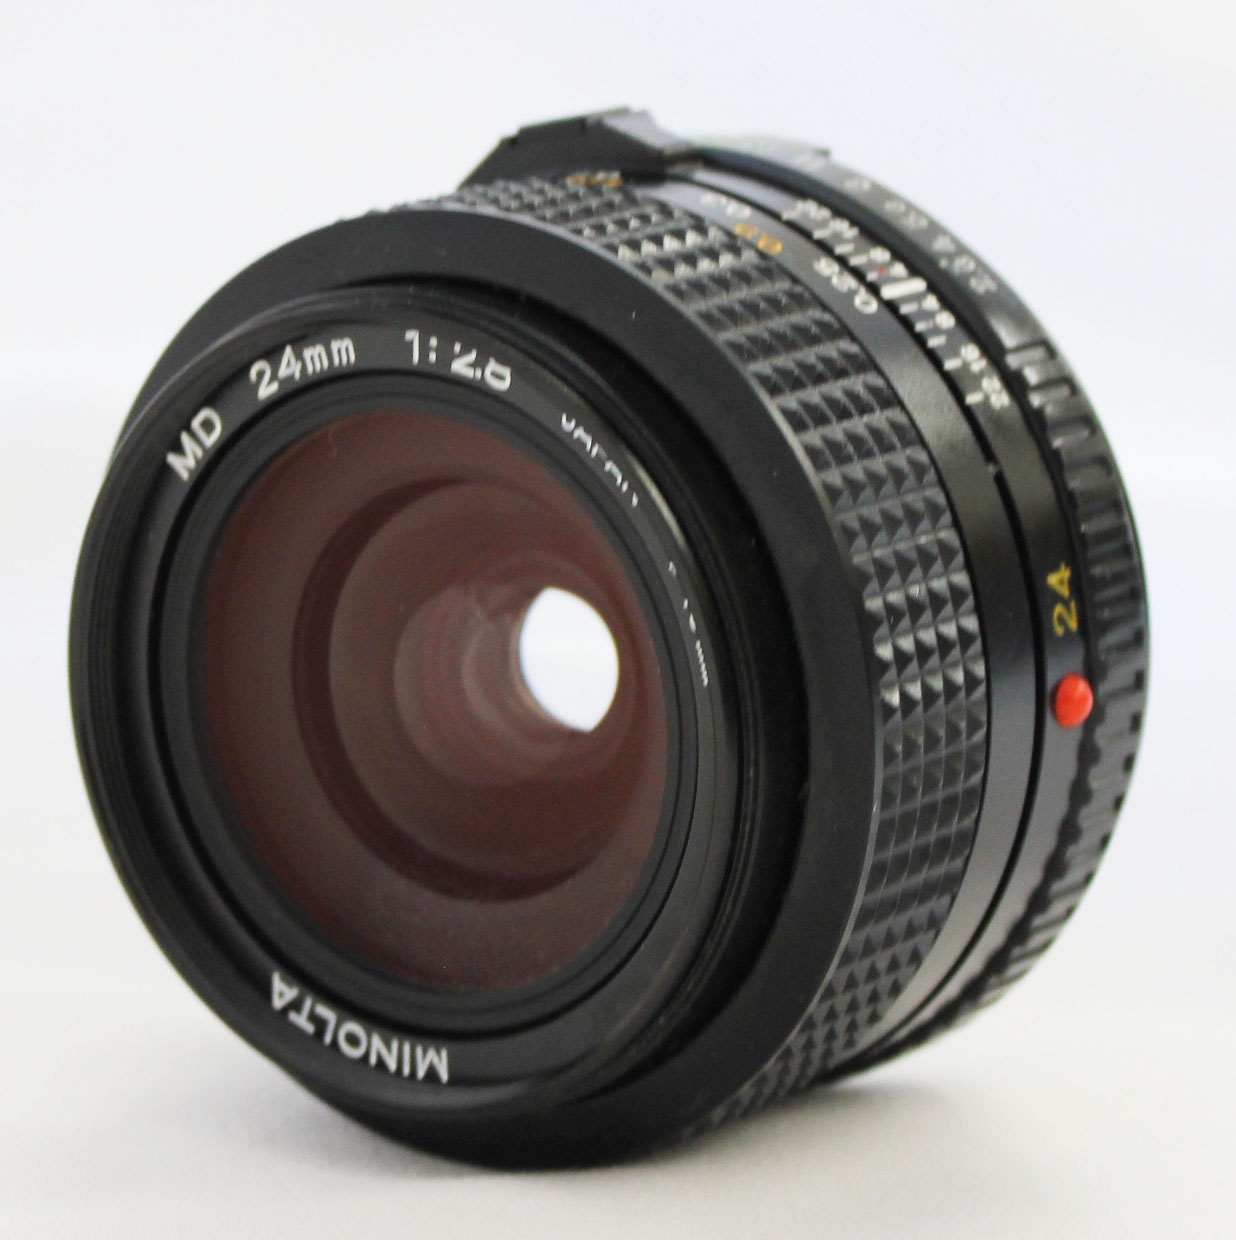 Japan Used Camera Shop | Minolta New MD 24mm F/2.8 Wide Angle MF Lens from Japan